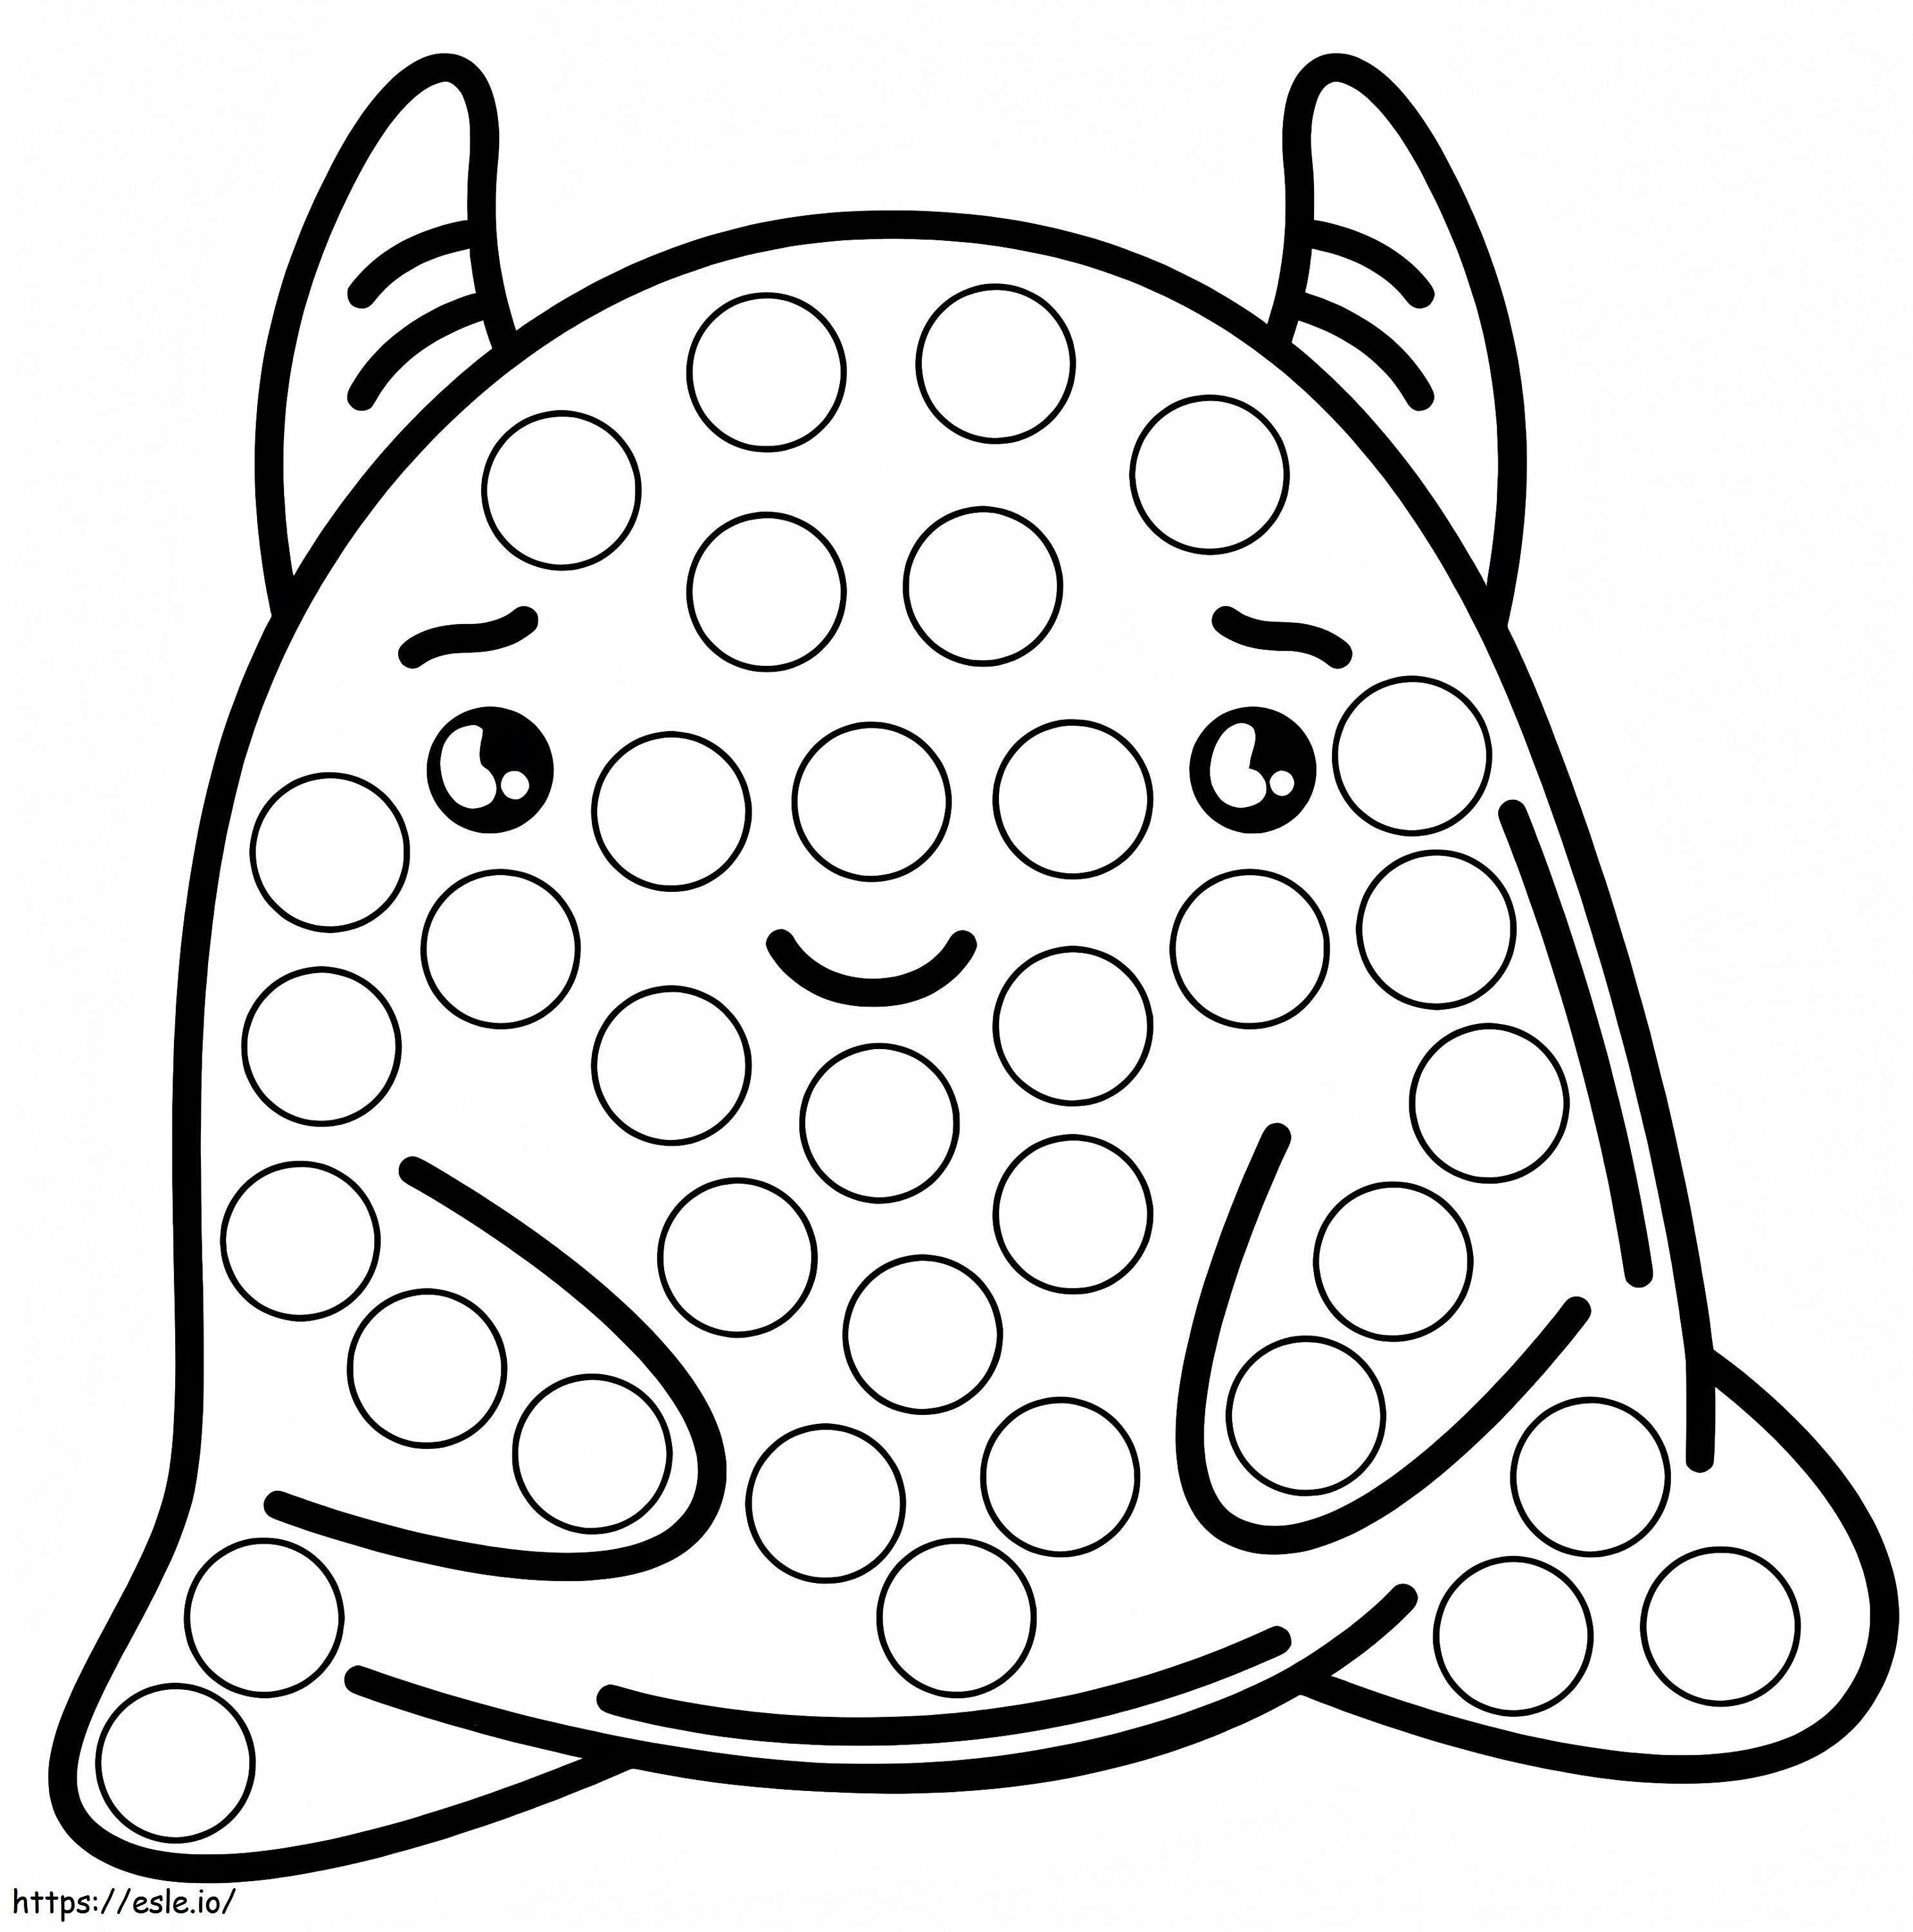 Cute Monster Dot Marker coloring page